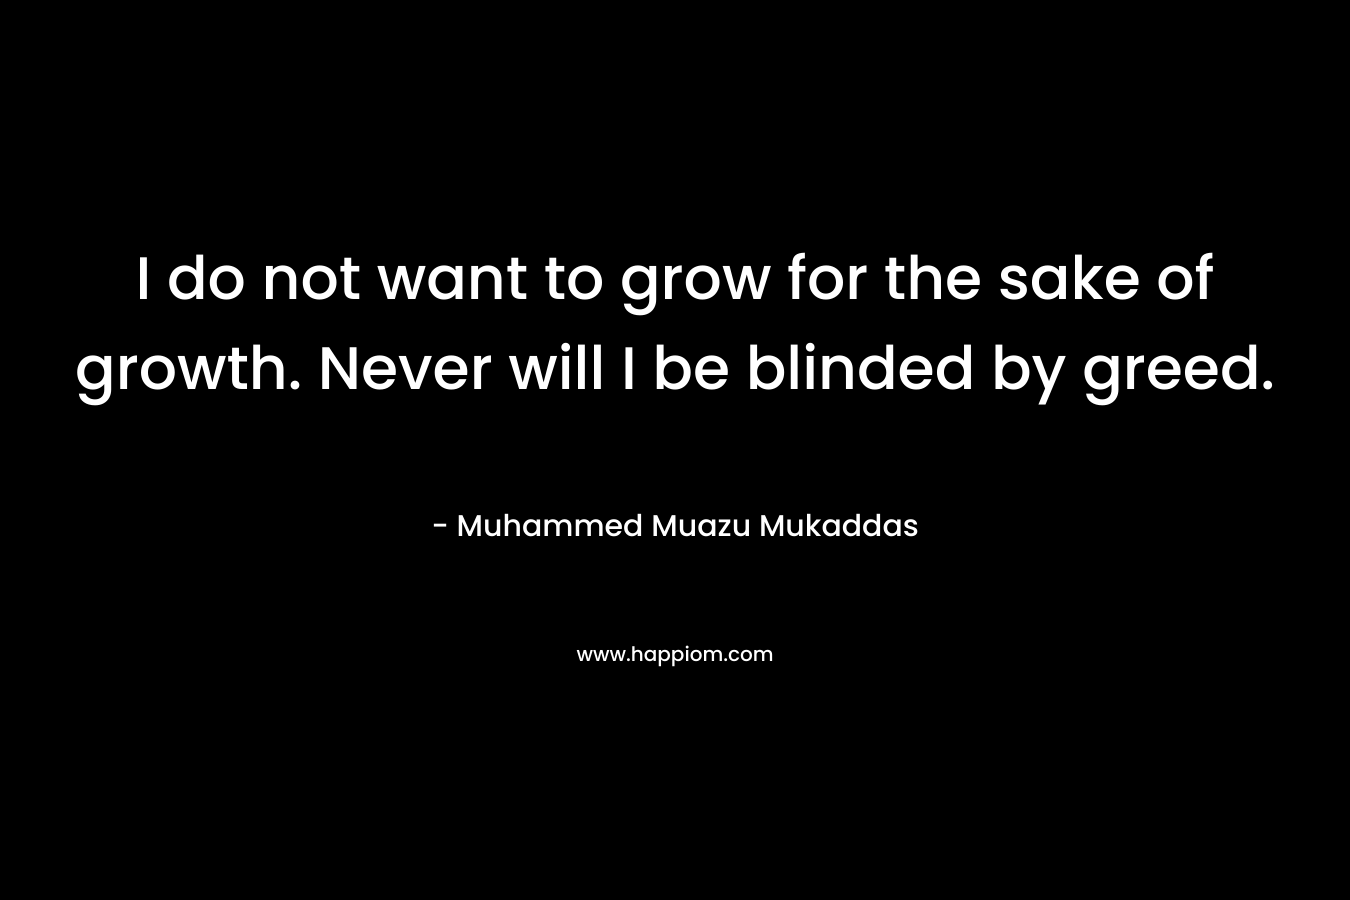 I do not want to grow for the sake of growth. Never will I be blinded by greed. – Muhammed Muazu Mukaddas